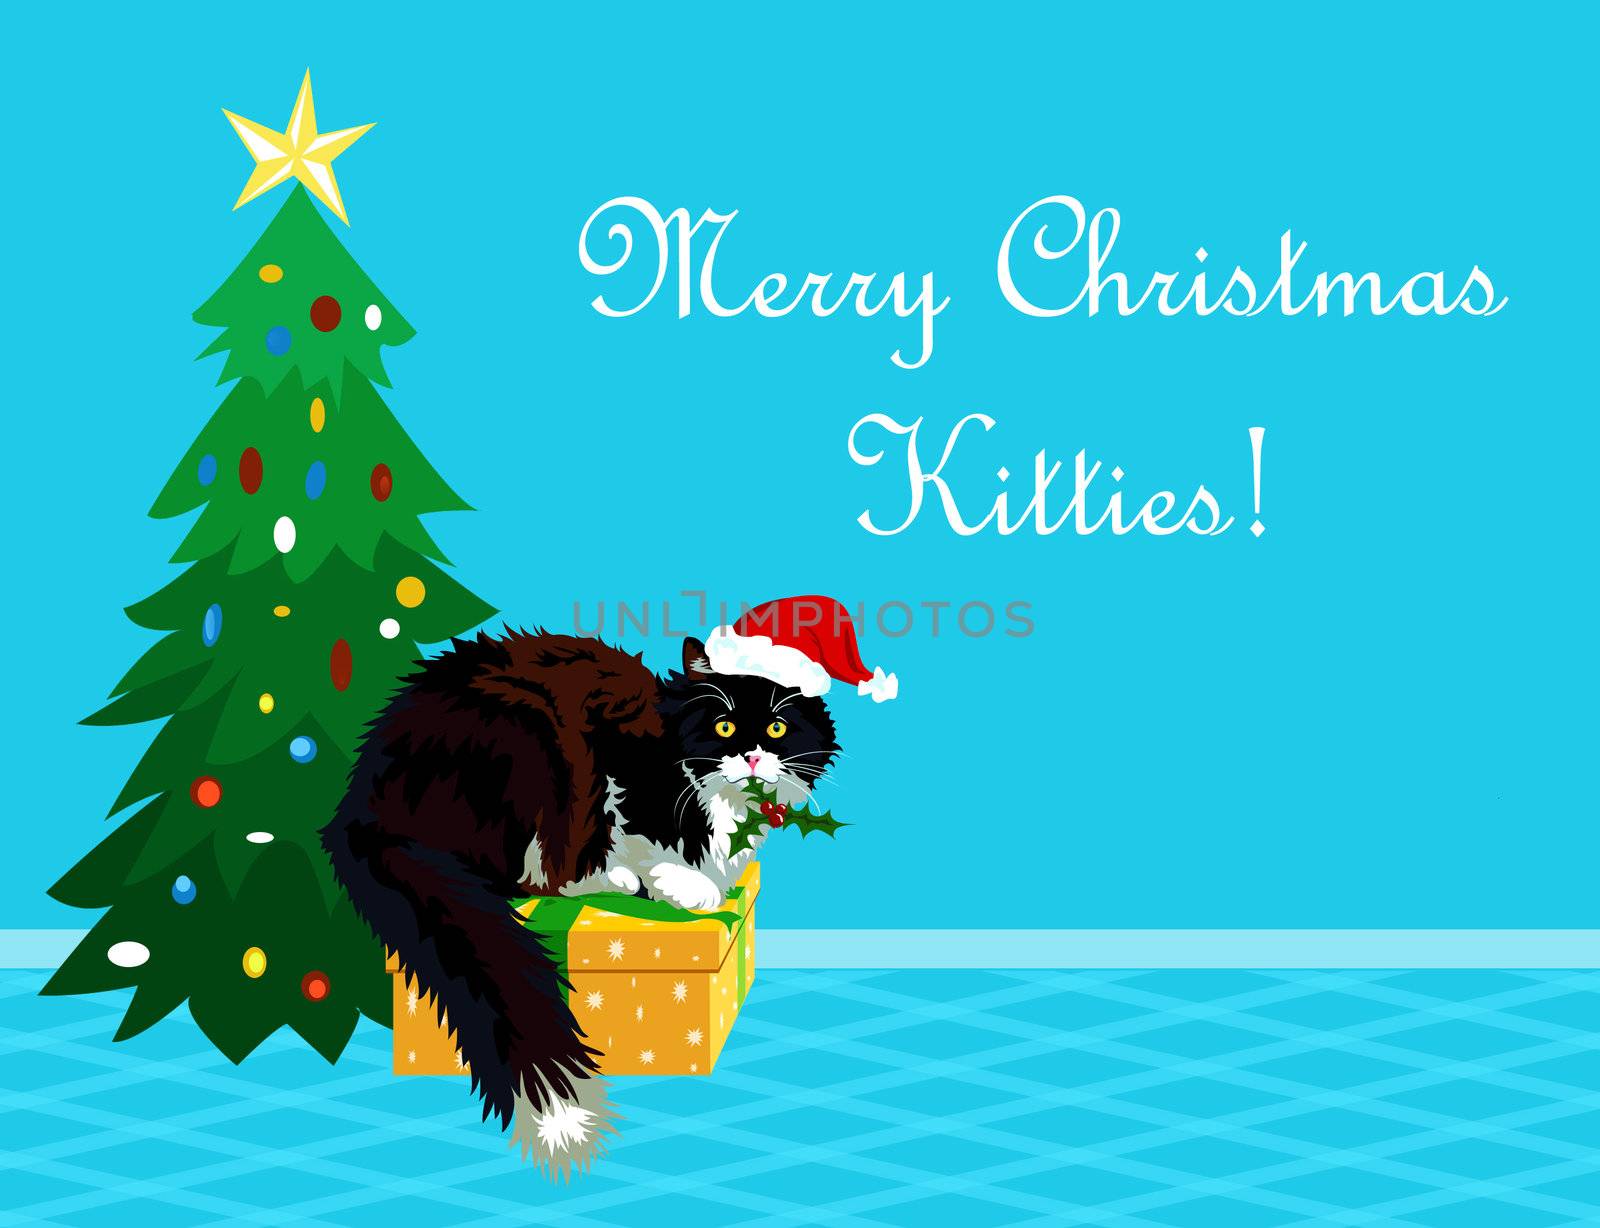 Christmas theme realistic calico cat with mistletoe in its mouth wishing a Merry Christmas to all the kitties. Funny cartoon making perfect greeting card.